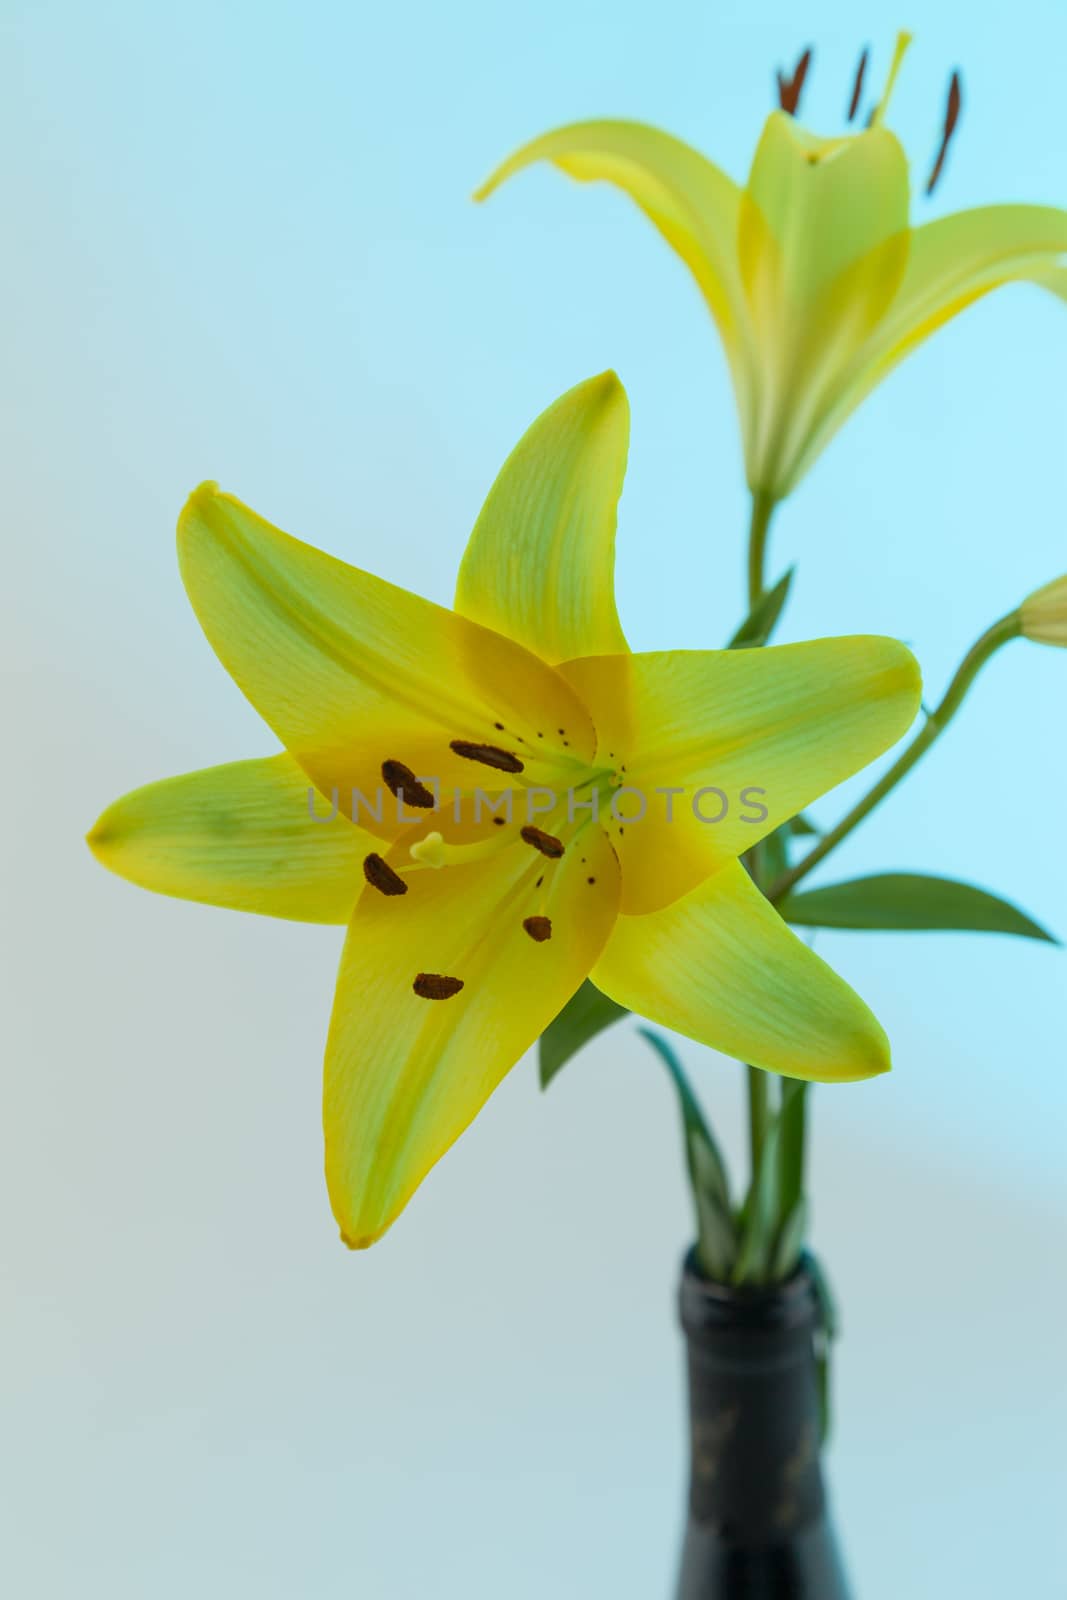 A yellow Asiatic Lily Lillium flower with green stem and leaves on a blue background by WittkePhotos